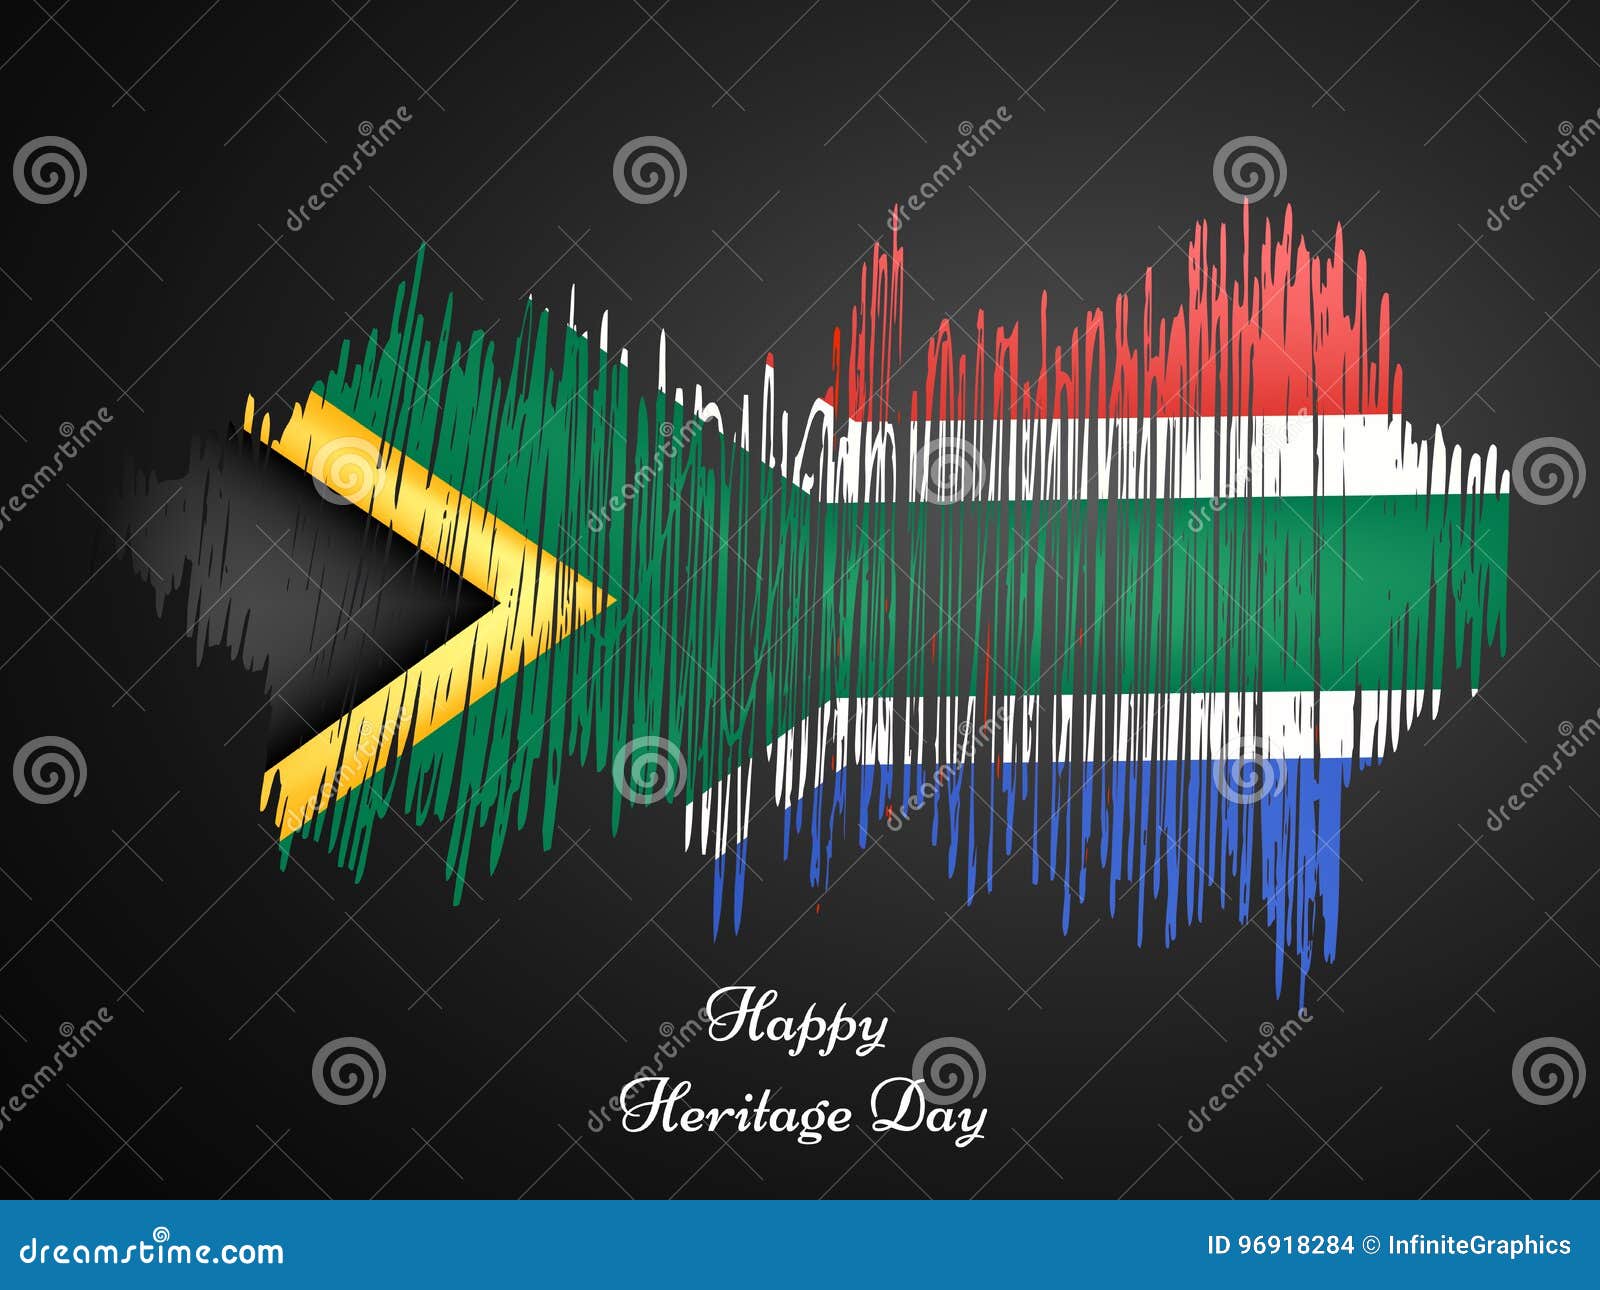  of heritage day background